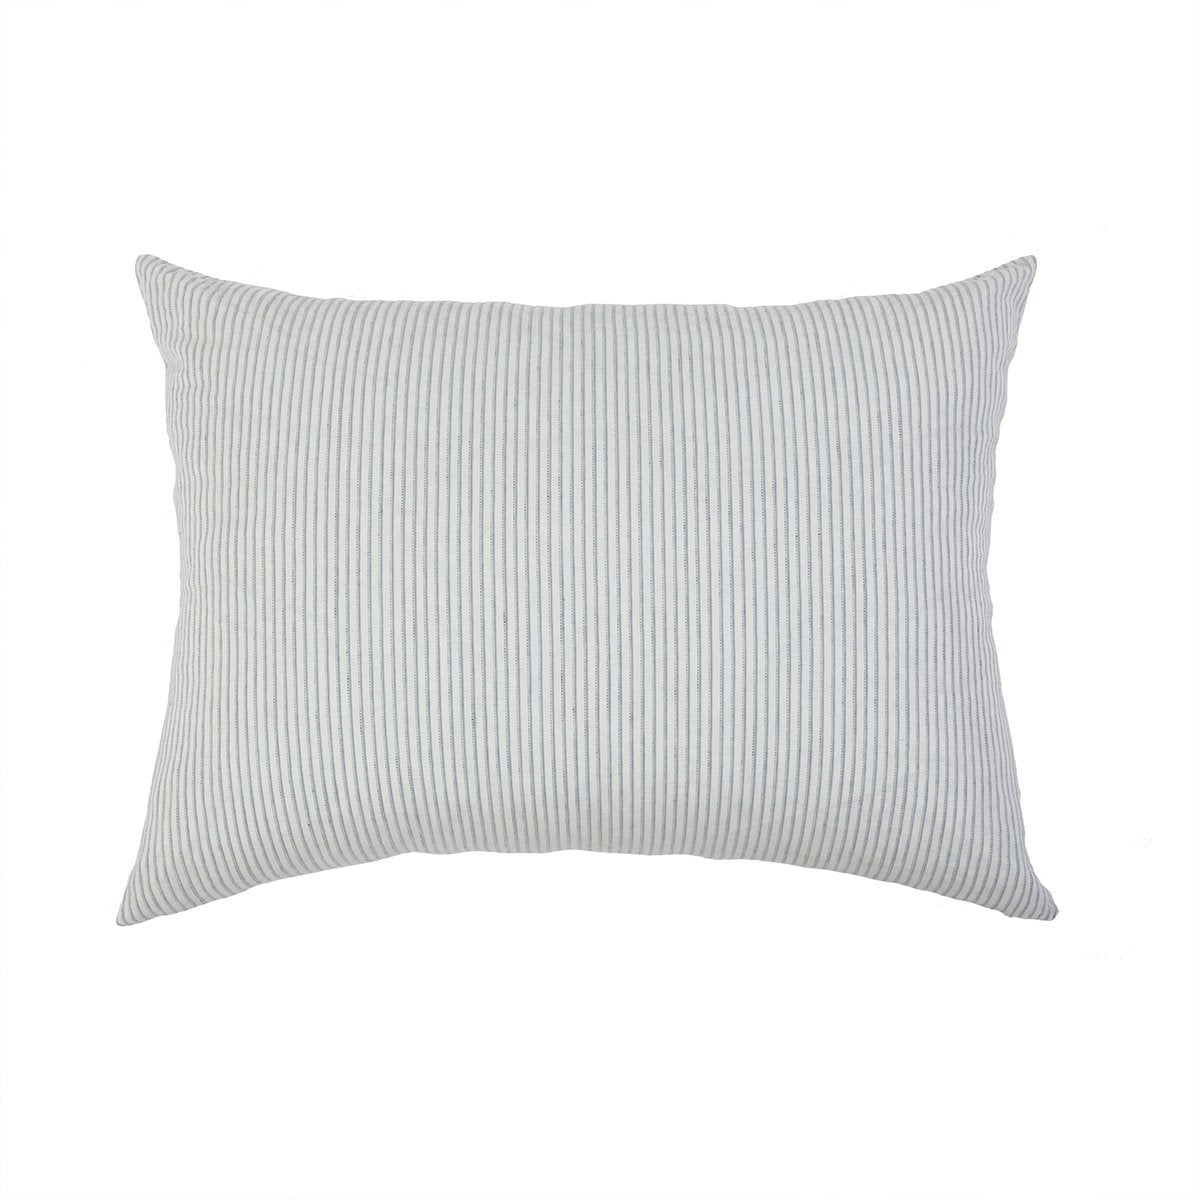 CONNOR BIG PILLOW 28" X 36" WITH INSERT - Ivory/Denim -Pom Pom at Home